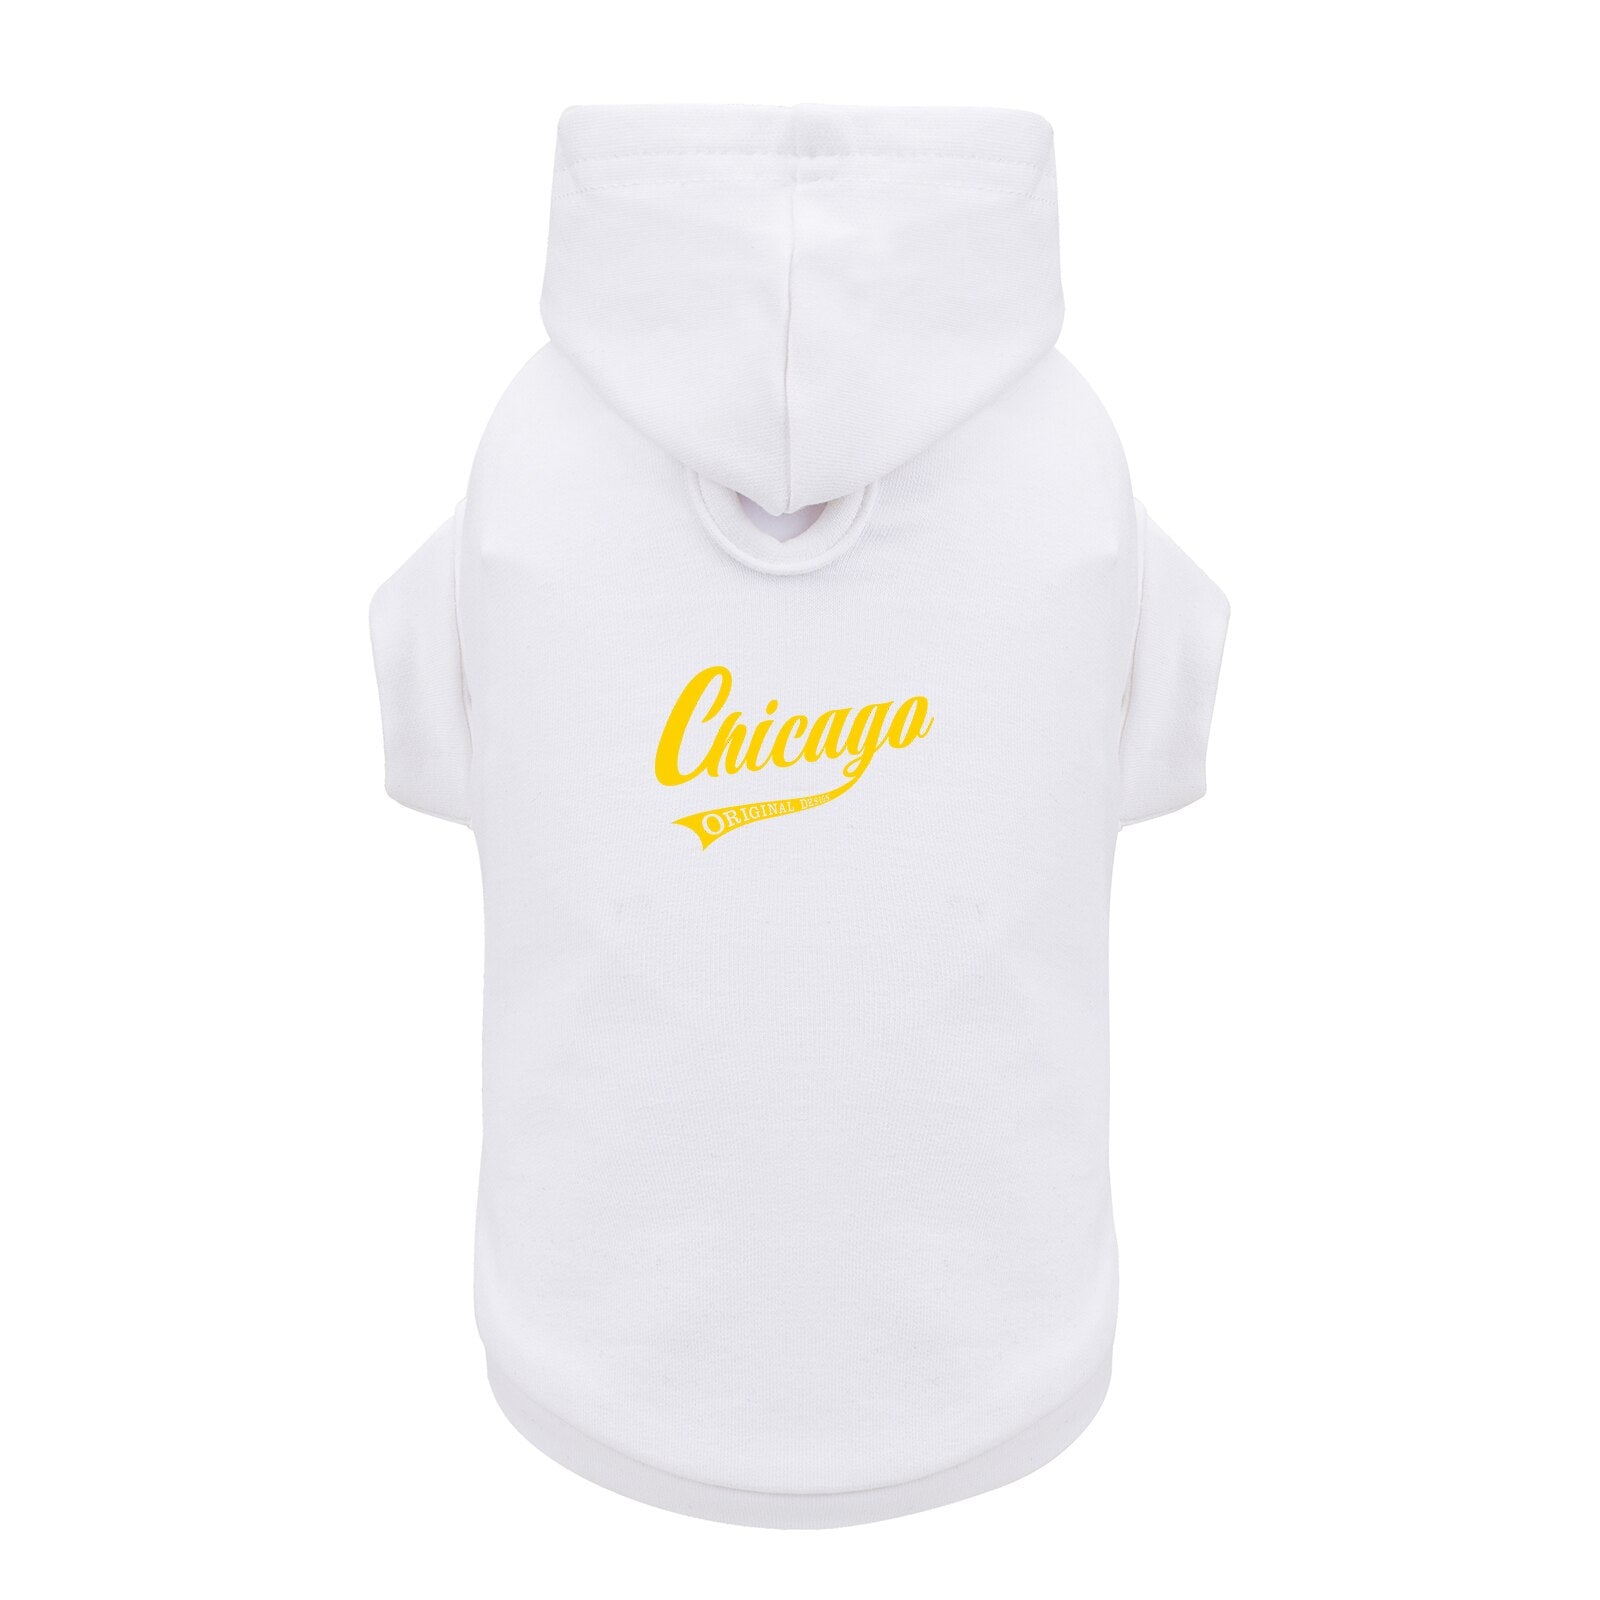 Dog Hoodies with Leash Hole Letter 'Chicago' Print Small Pet Clothes Zebra Stripe Red White 2022 New Cotton Soft Fabric